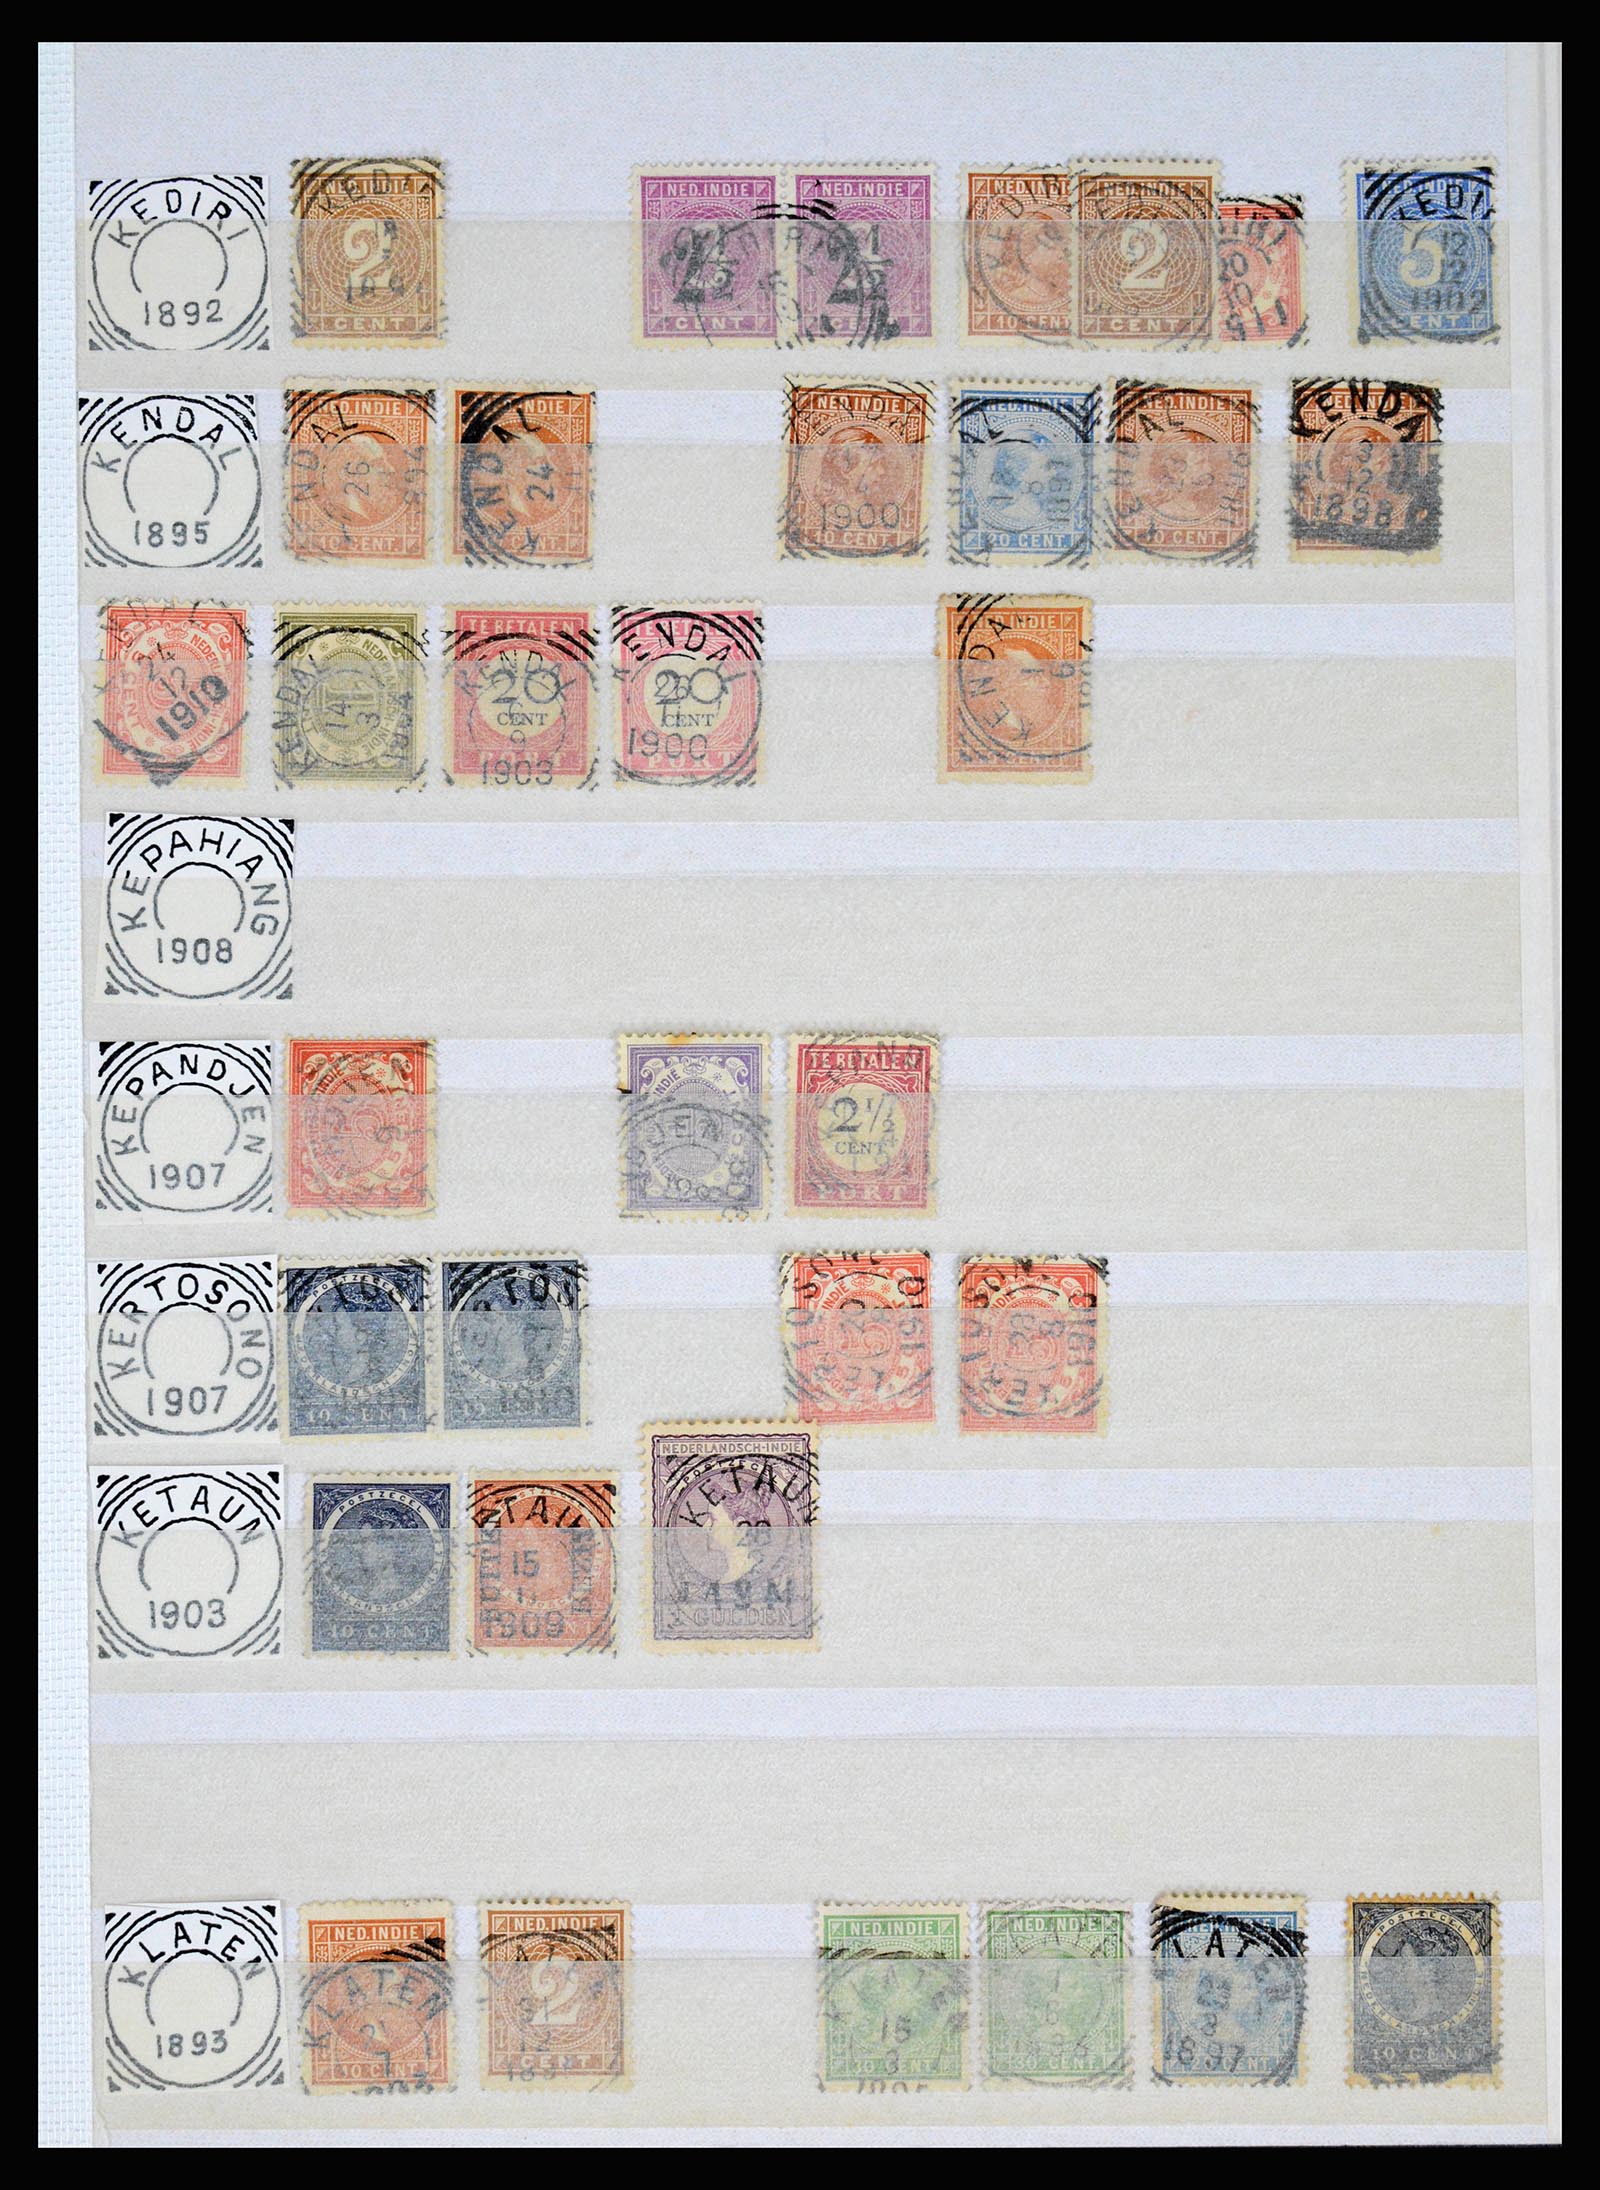 36839 072 - Stamp collection 36839 Dutch east Indies square cancels.